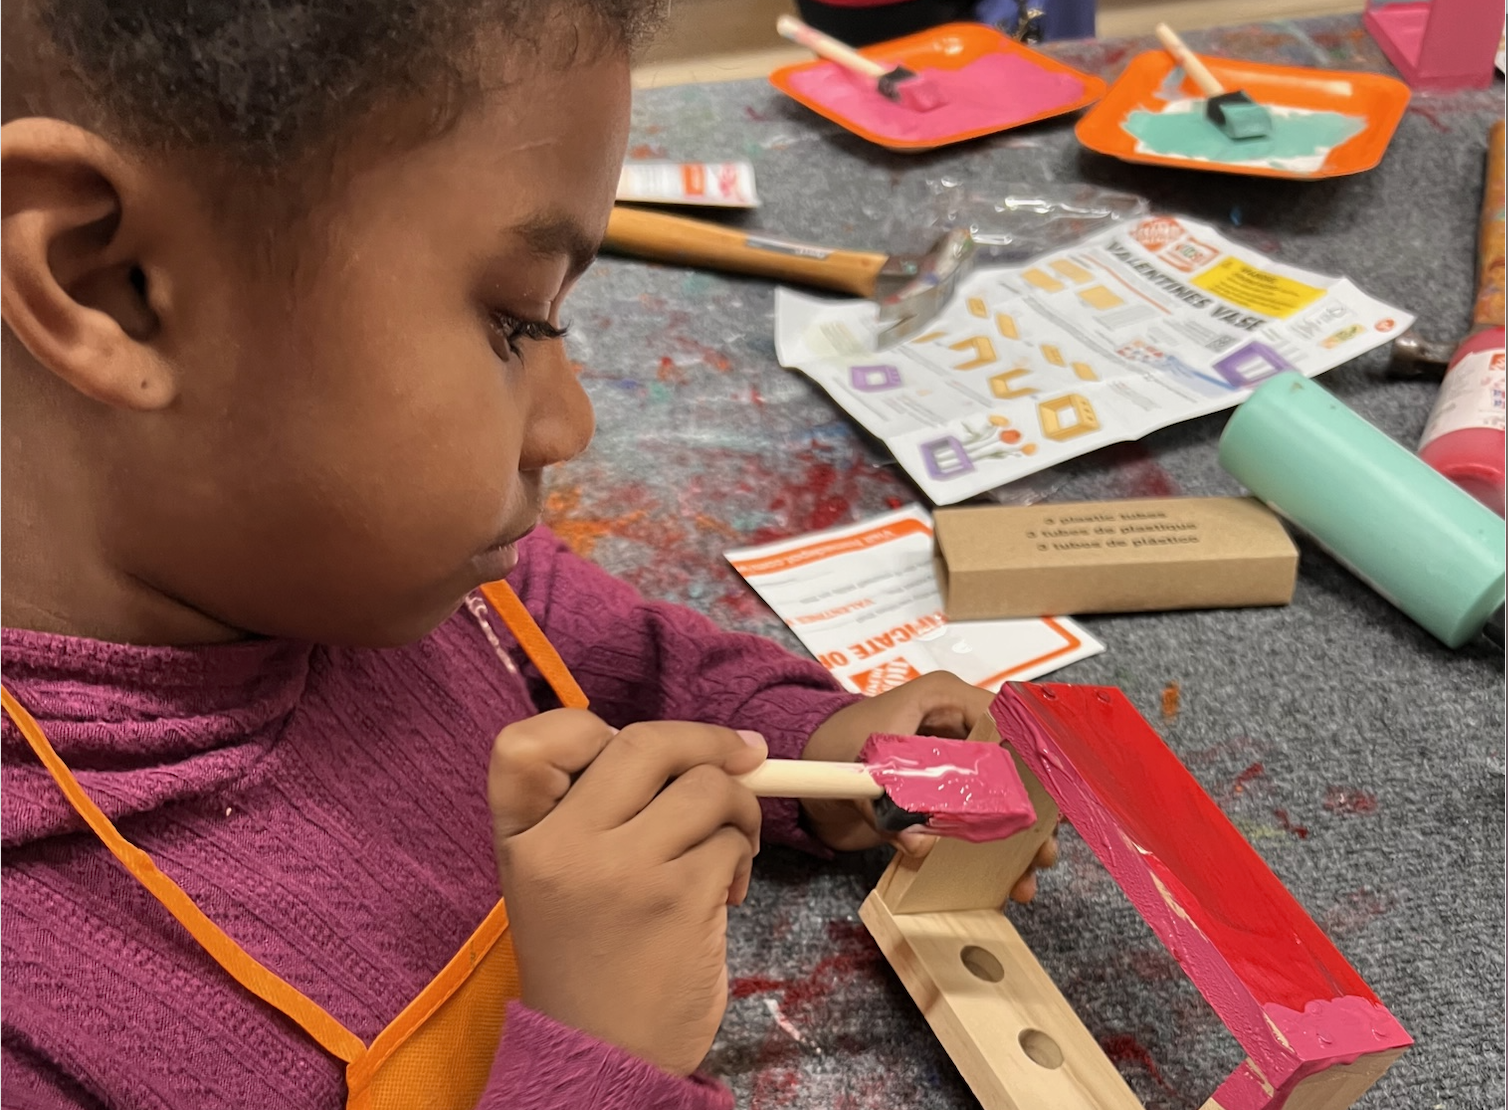 Things to do: Try a local DIY Kid Workshop Saturday